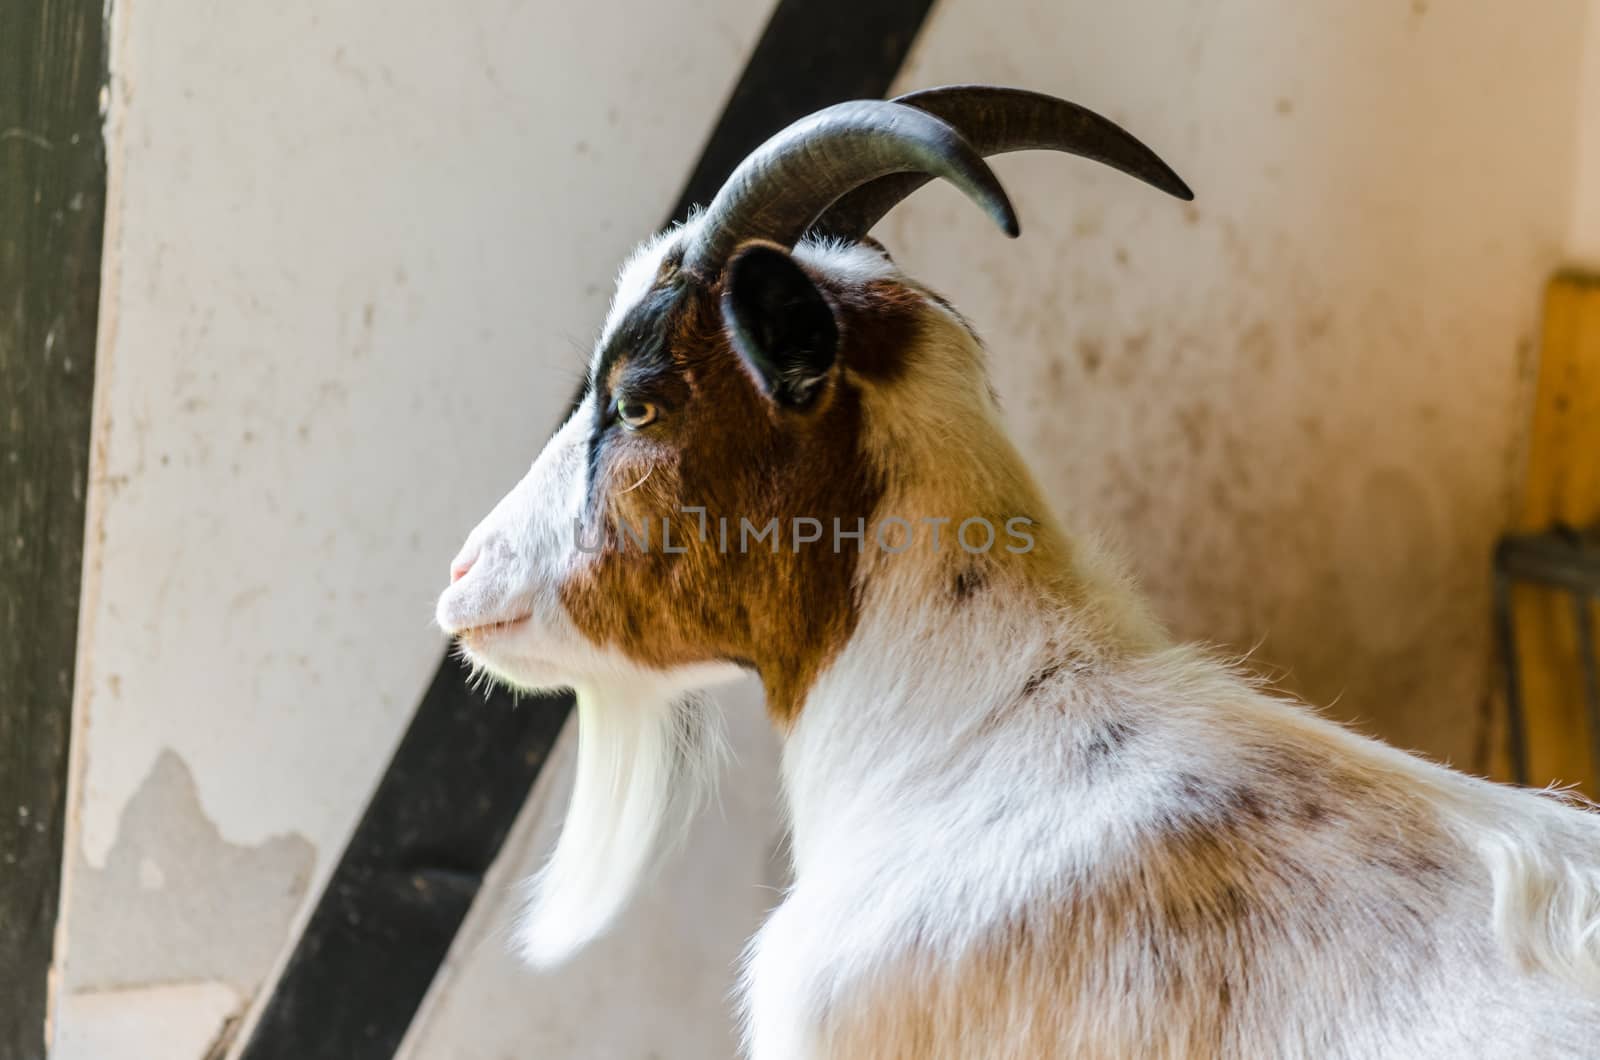 Goat in the barn by JFsPic